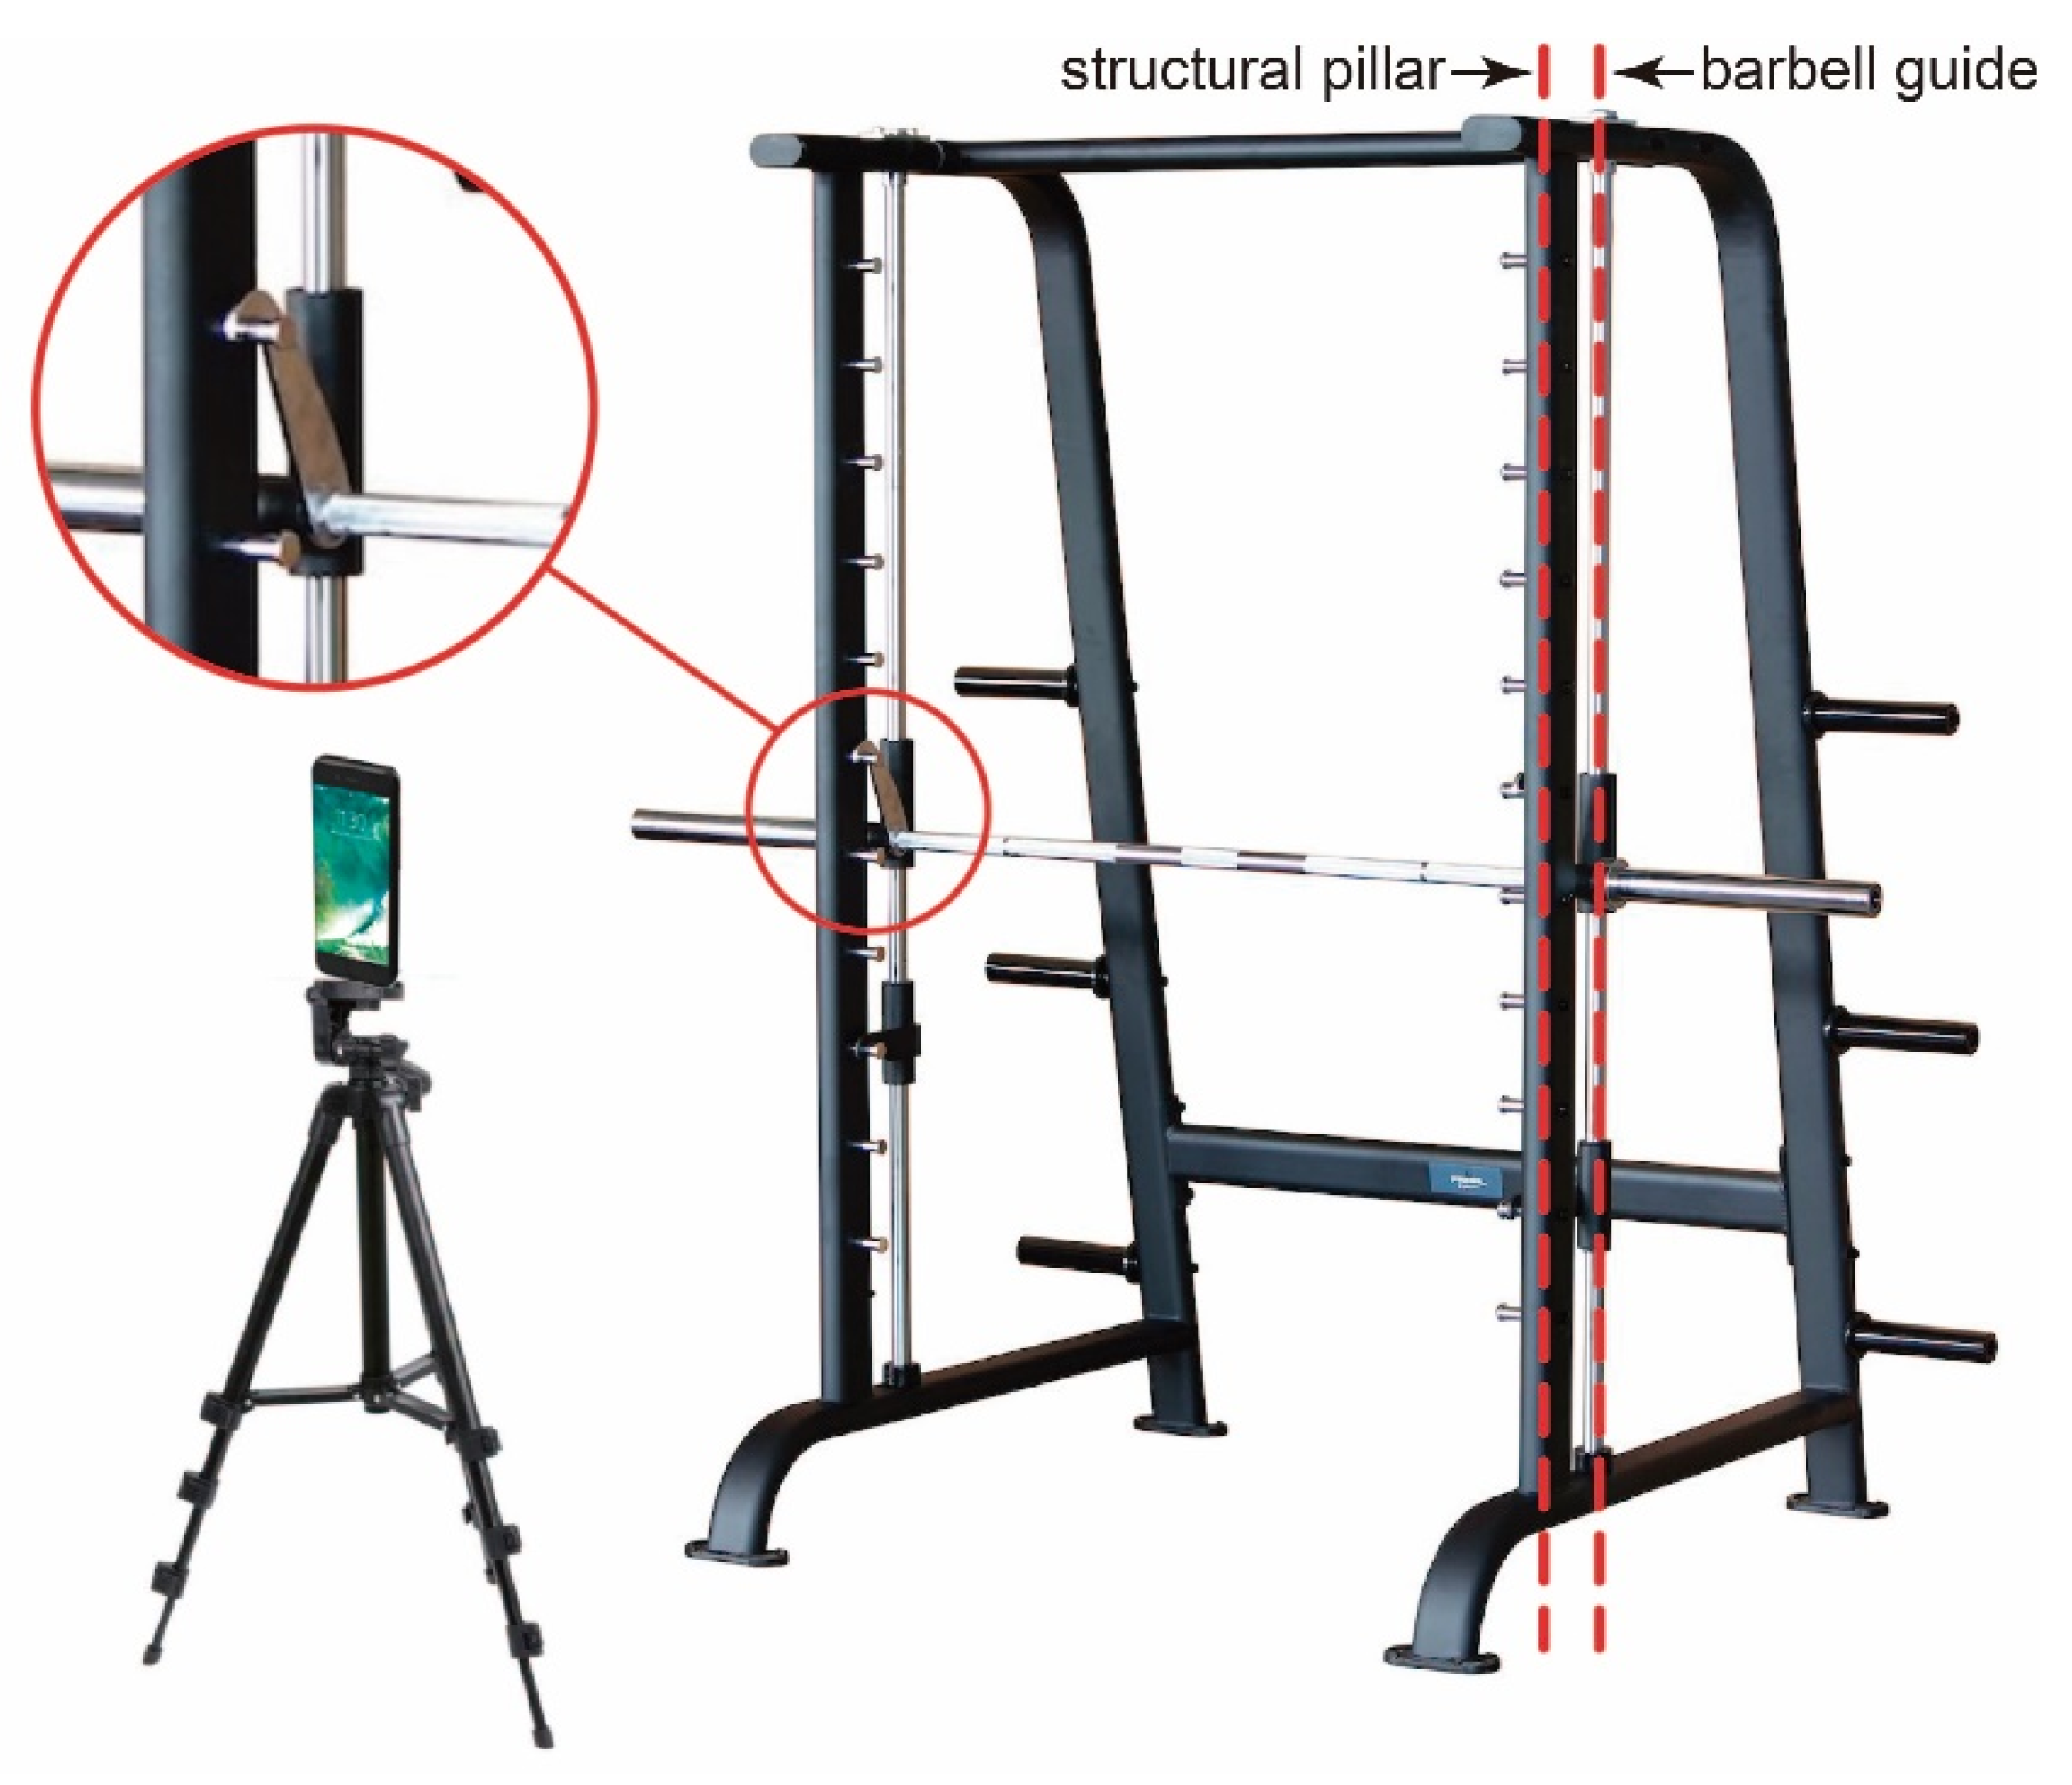 Barbell Guide